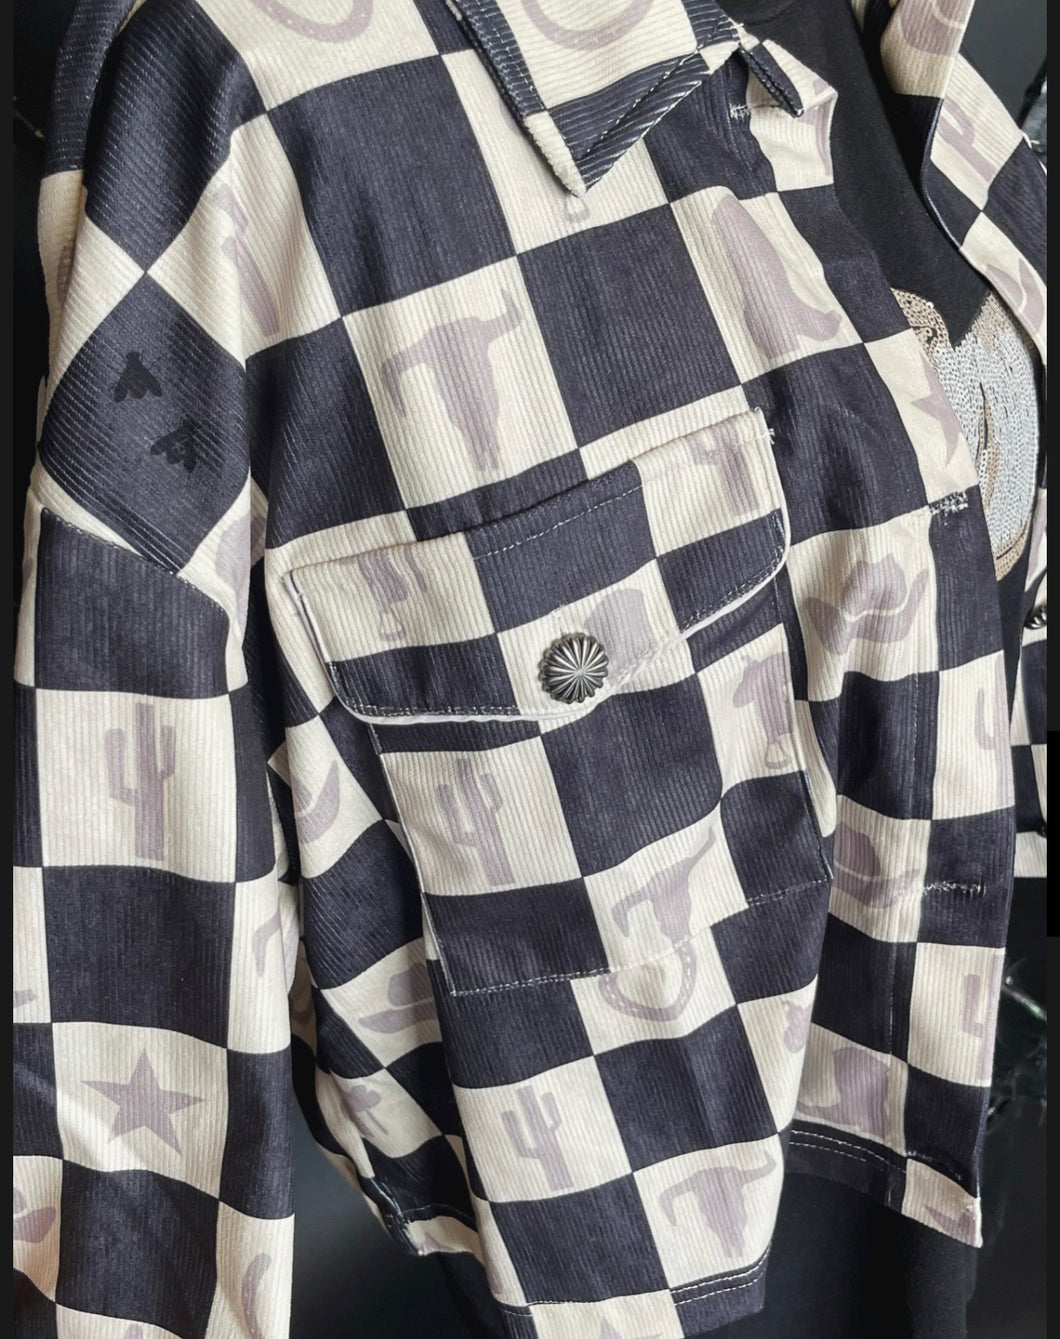 The Checkmate Jacket